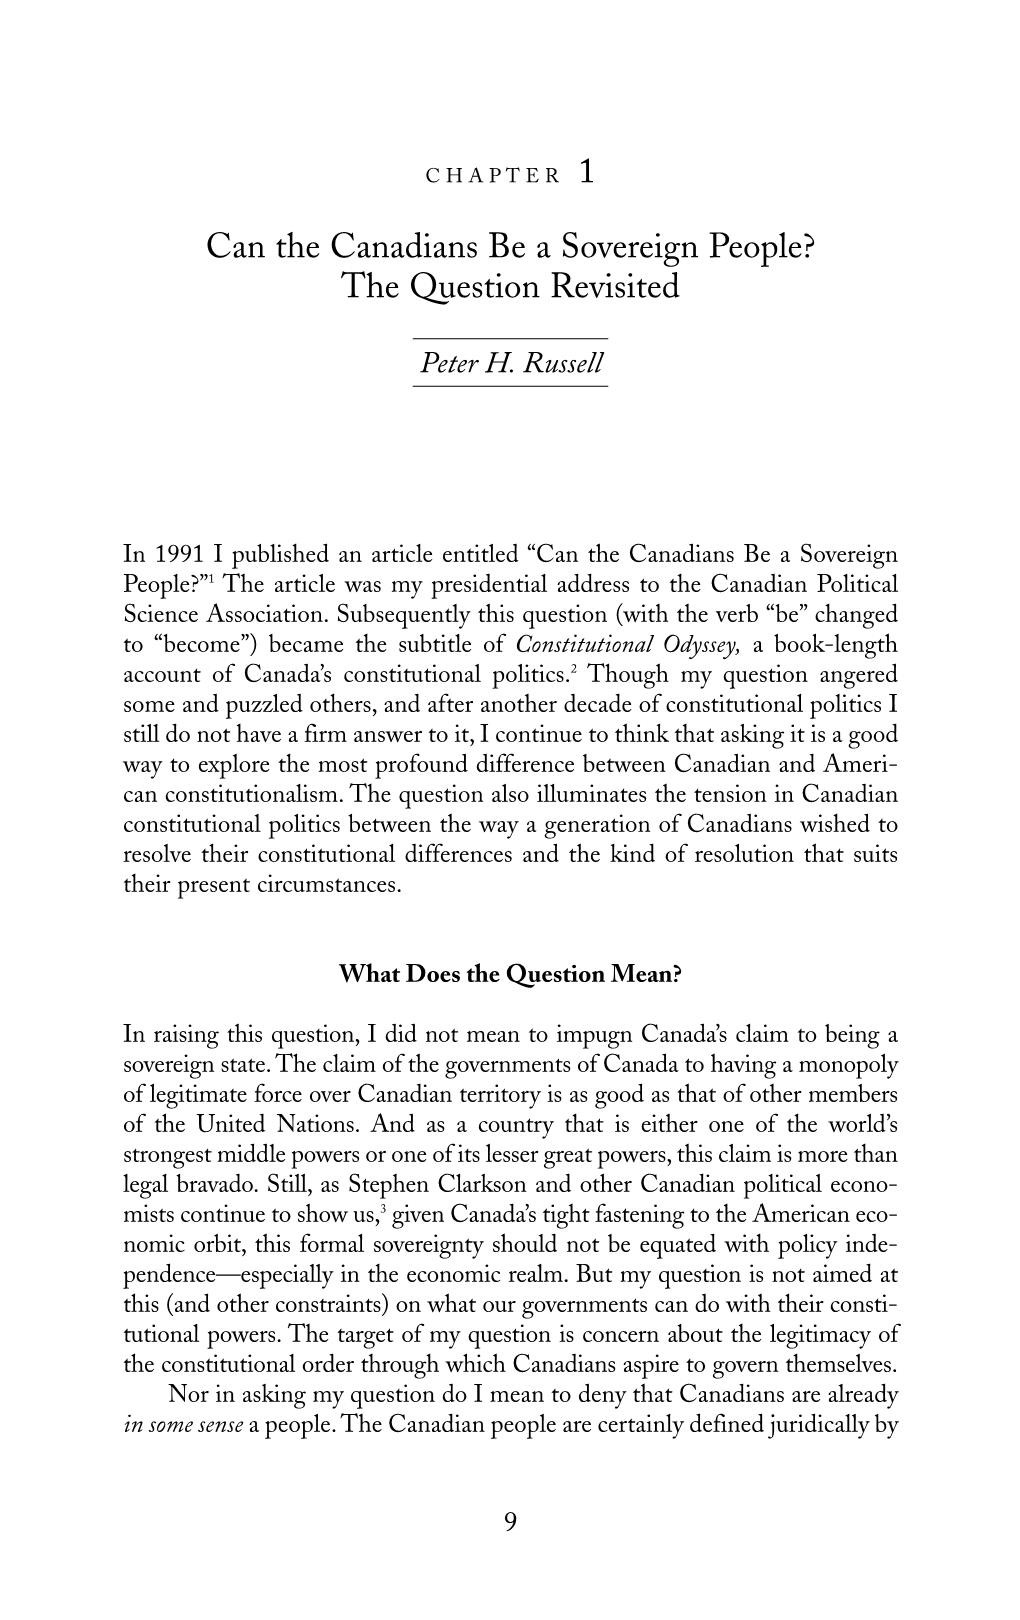 Can the Canadians Be a Sovereign People? the Question Revisited